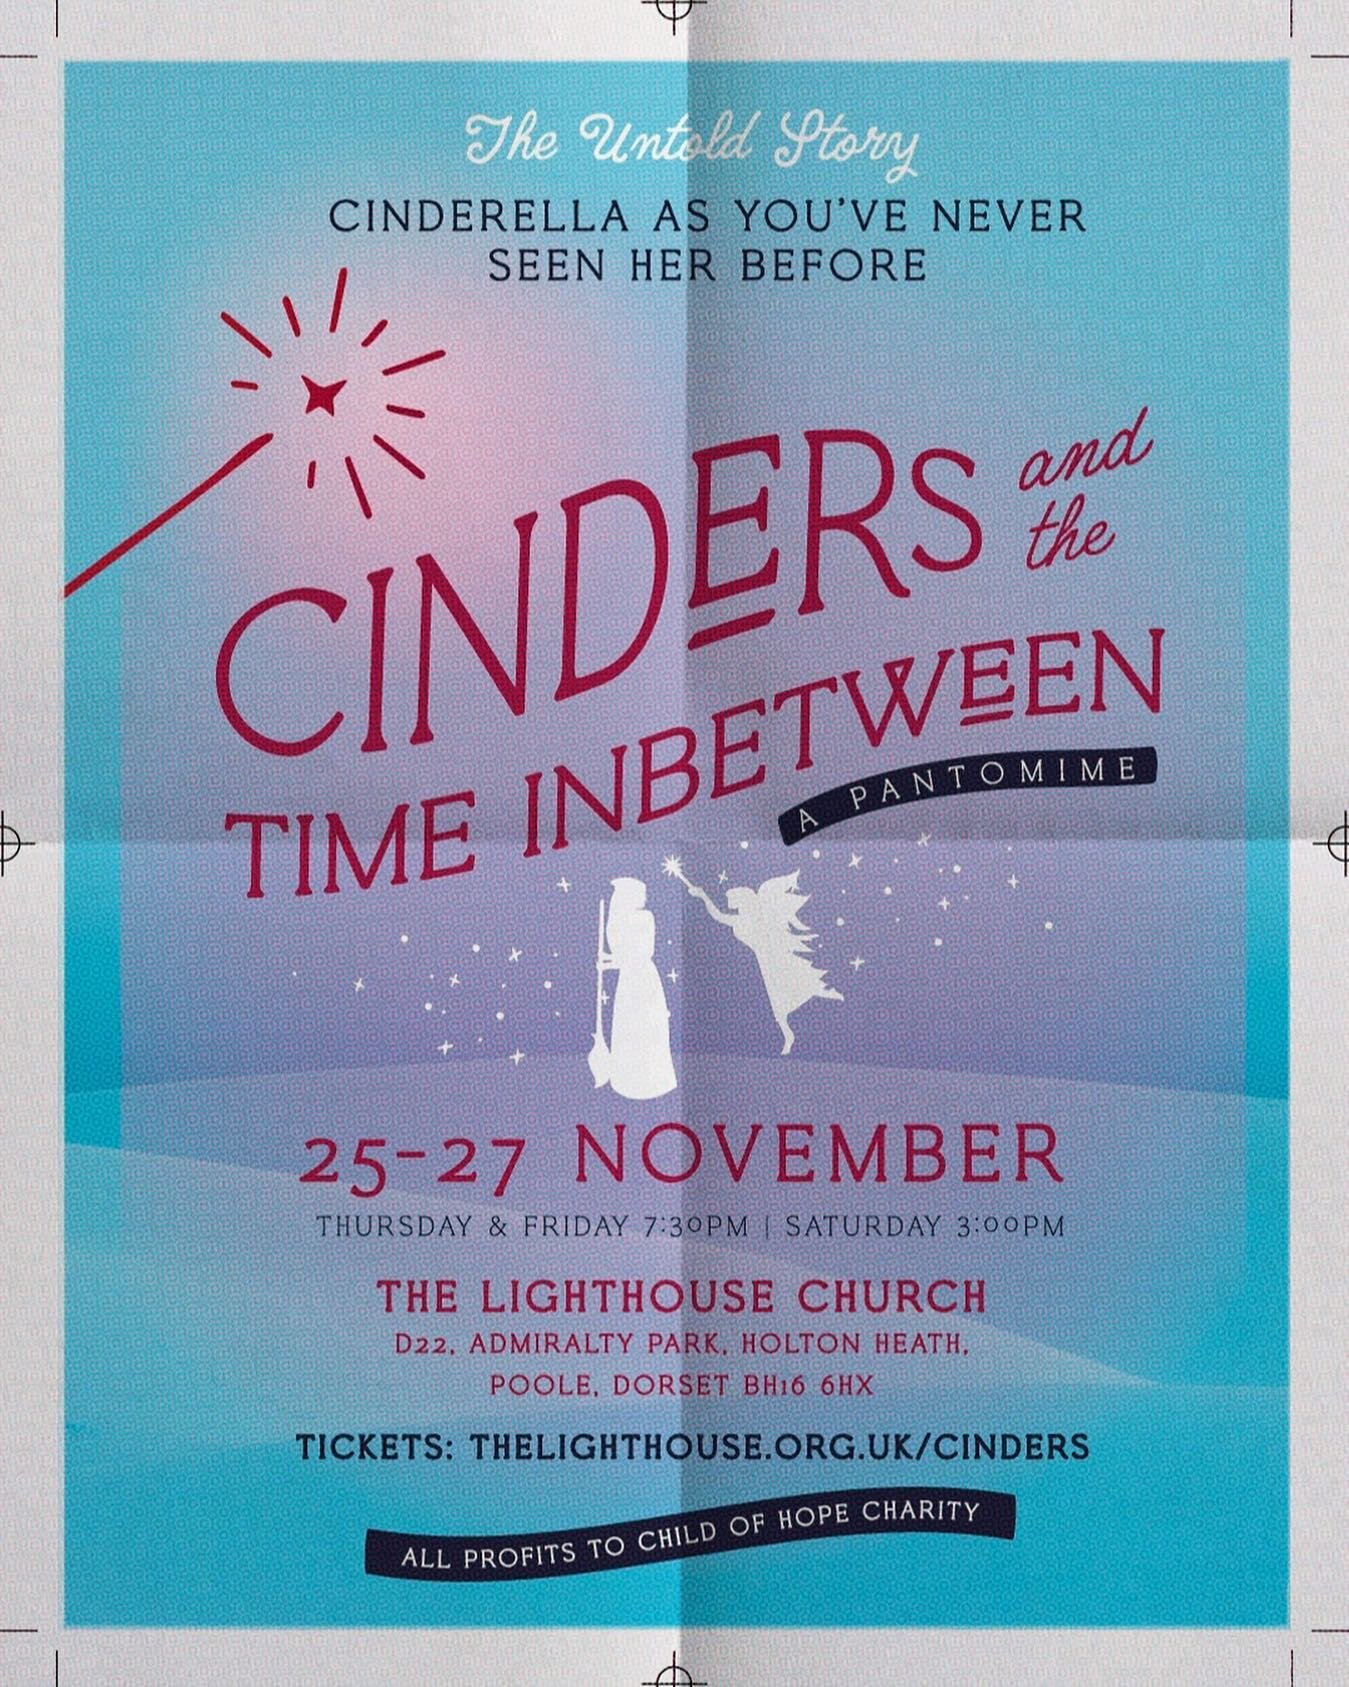 Very excited to share about our upcoming Panto next month! 

Cinders and the Time Inbetween

THE UNTOLD STORY: CINDERELLA AS YOU&rsquo;VE NEVER SEEN HER BEFORE

All profits will go to Child of Hope!

This is a great opportunity to invite friends, fam